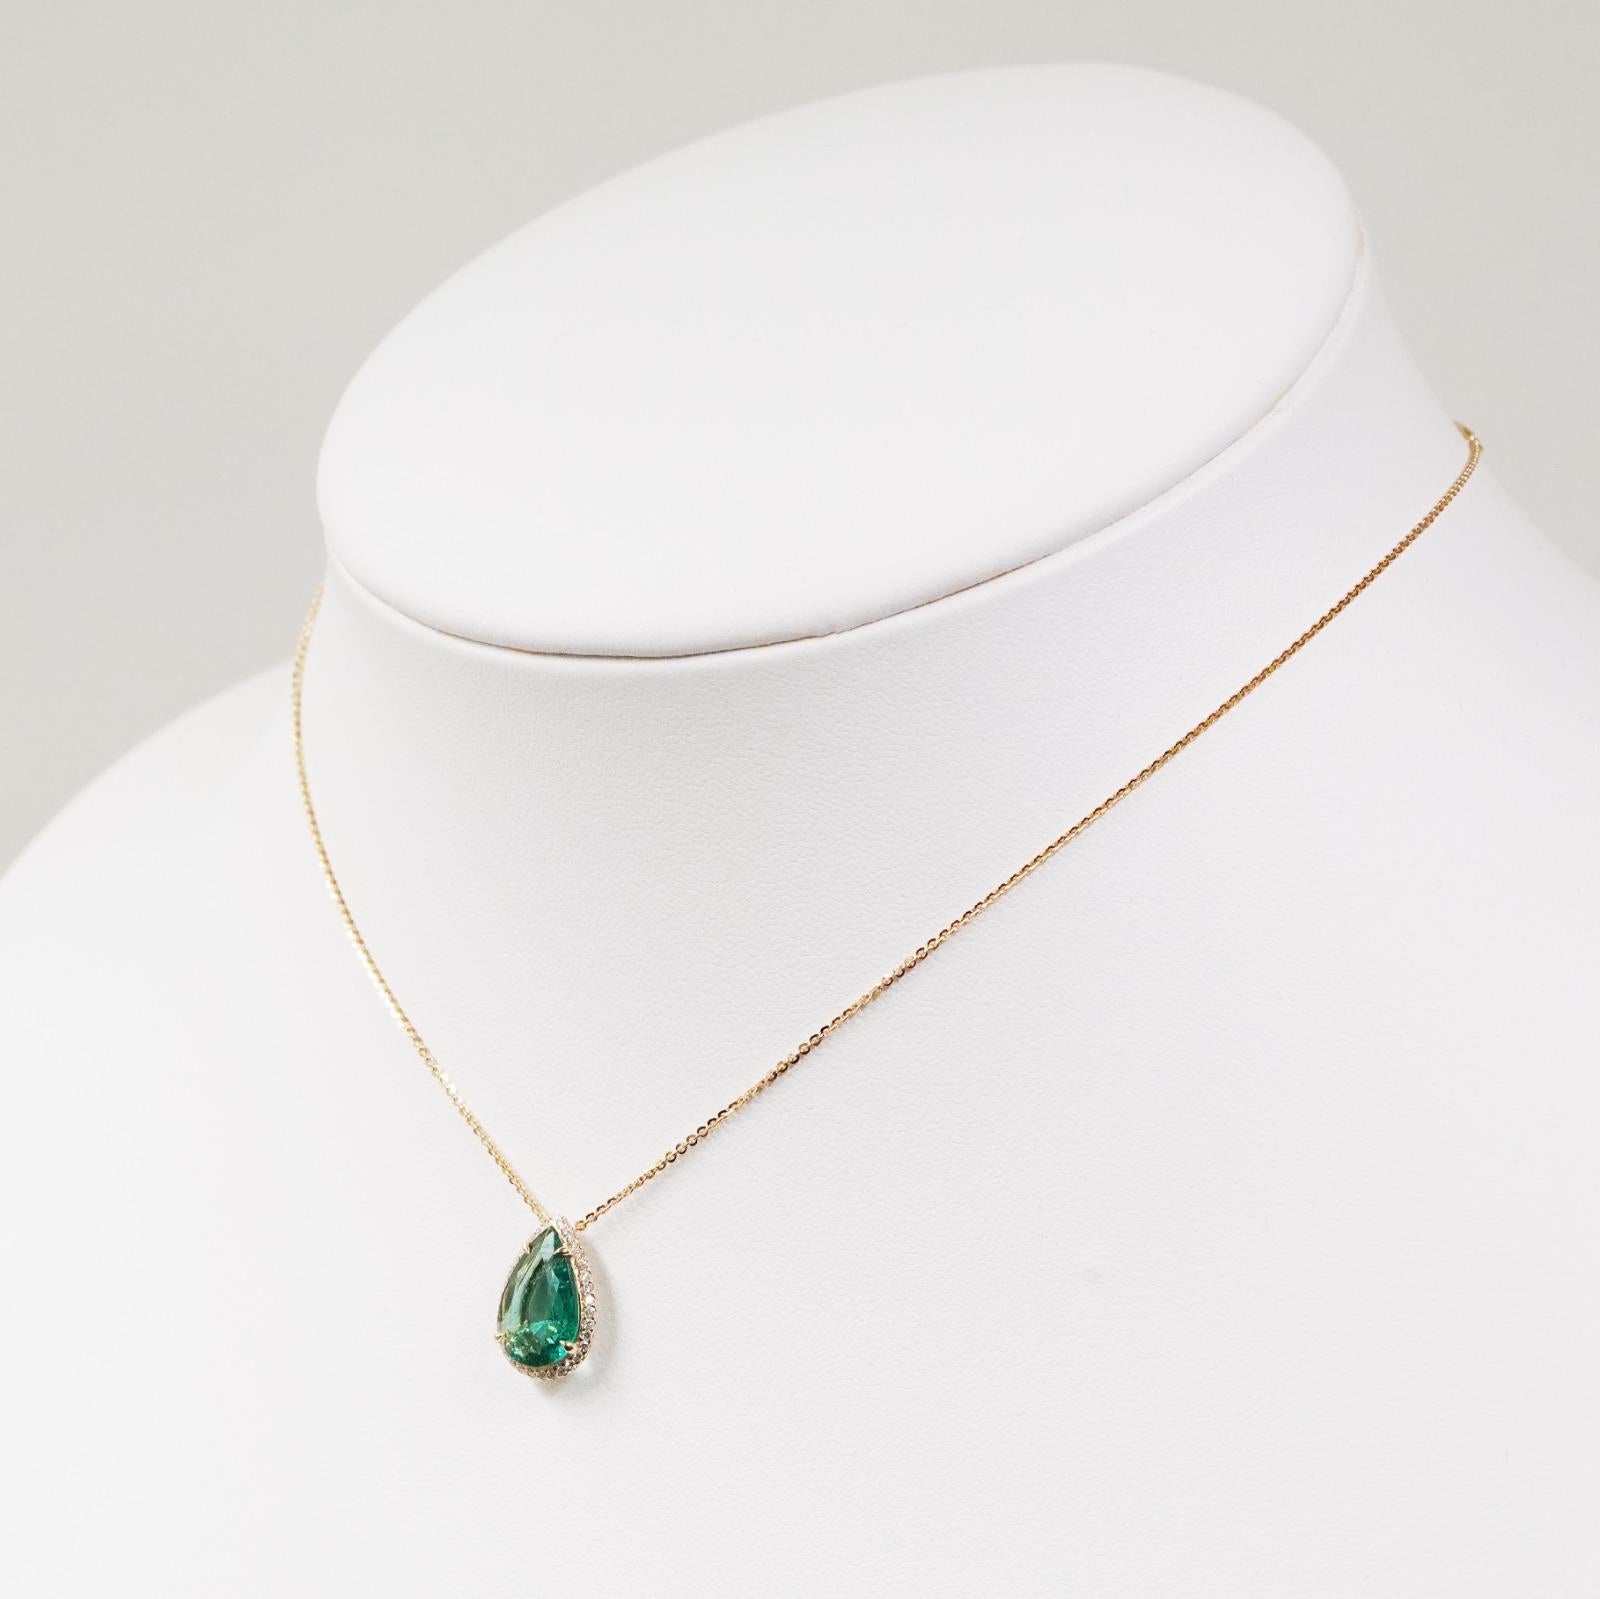 Pear Cut 18K Yellow Gold Necklace With Emerald  2.37 ct. For Sale